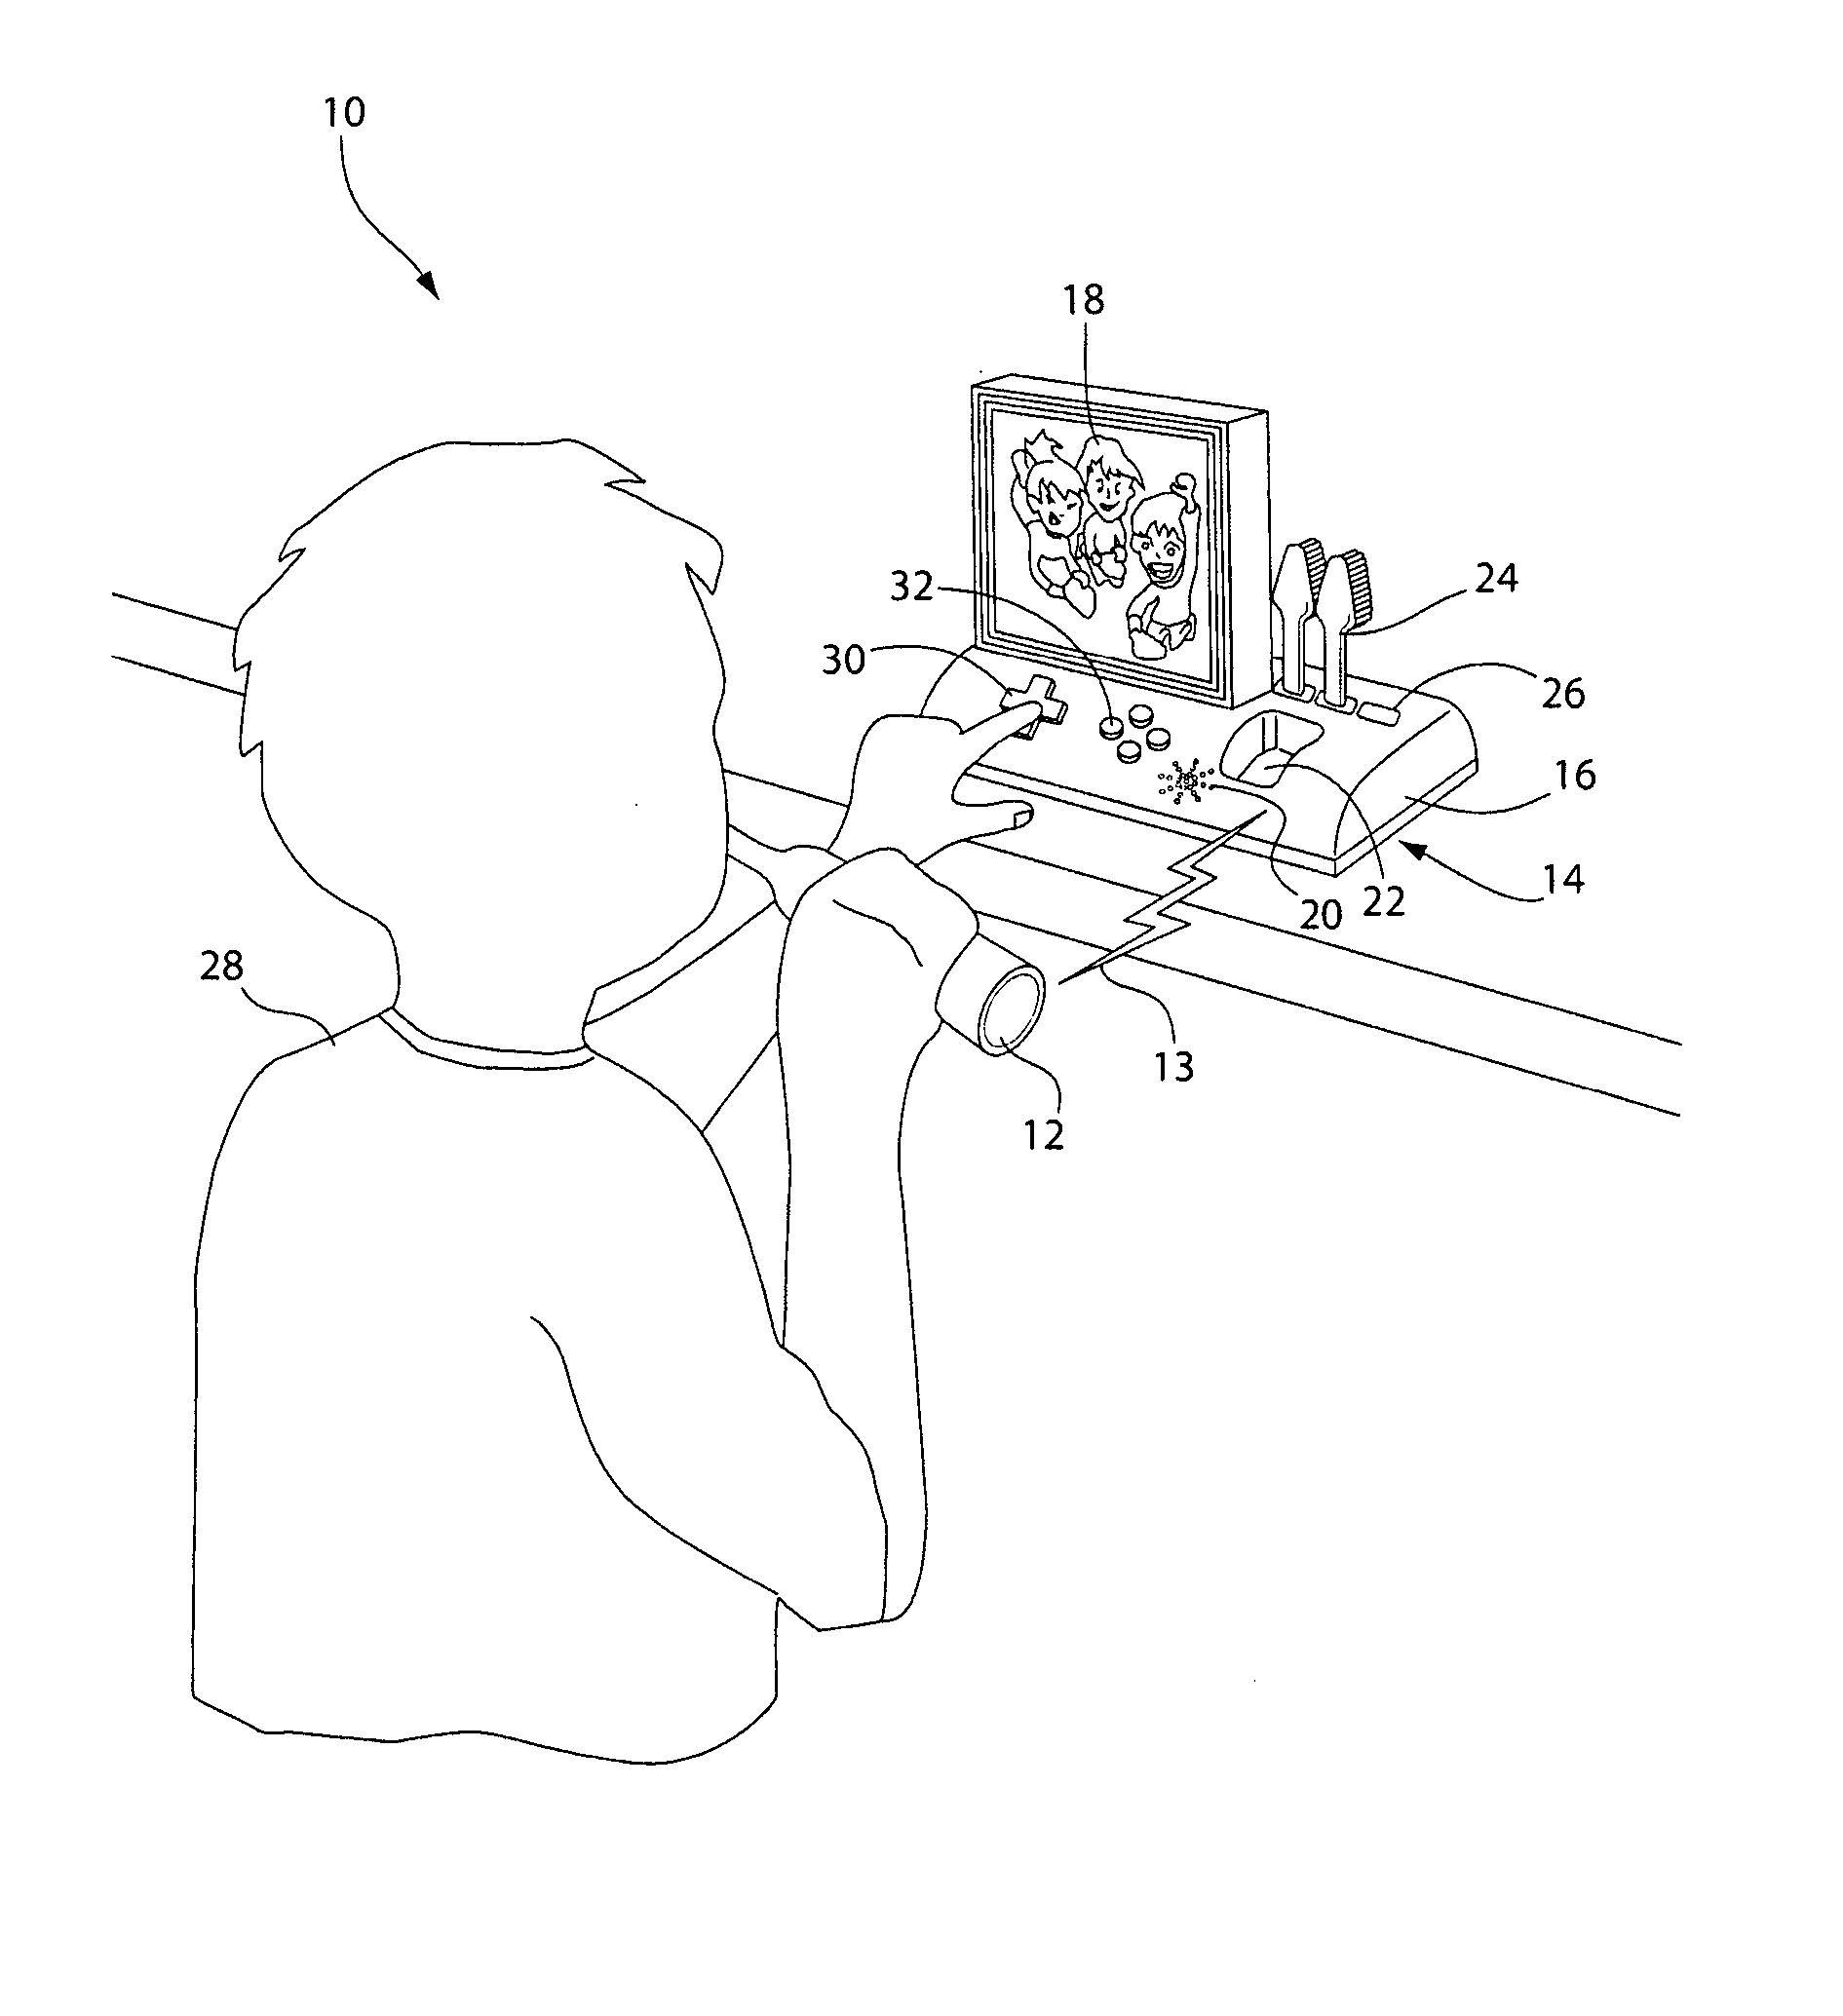 Oral care gaming system and methods